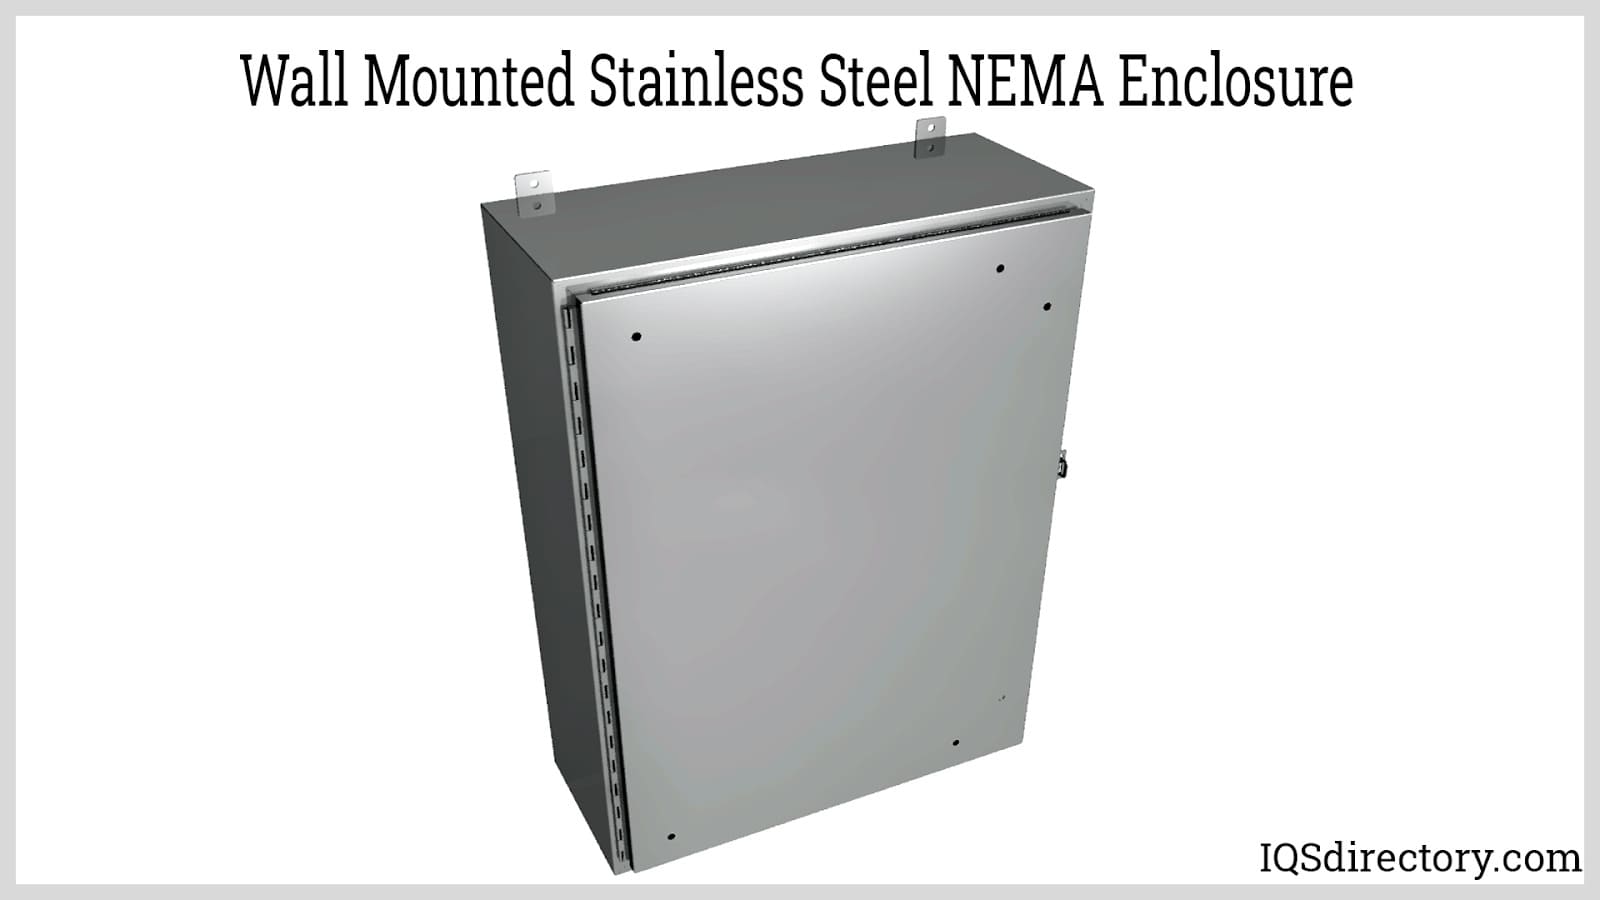 Wall Mounted Stainless Steel NEMA Enclosure